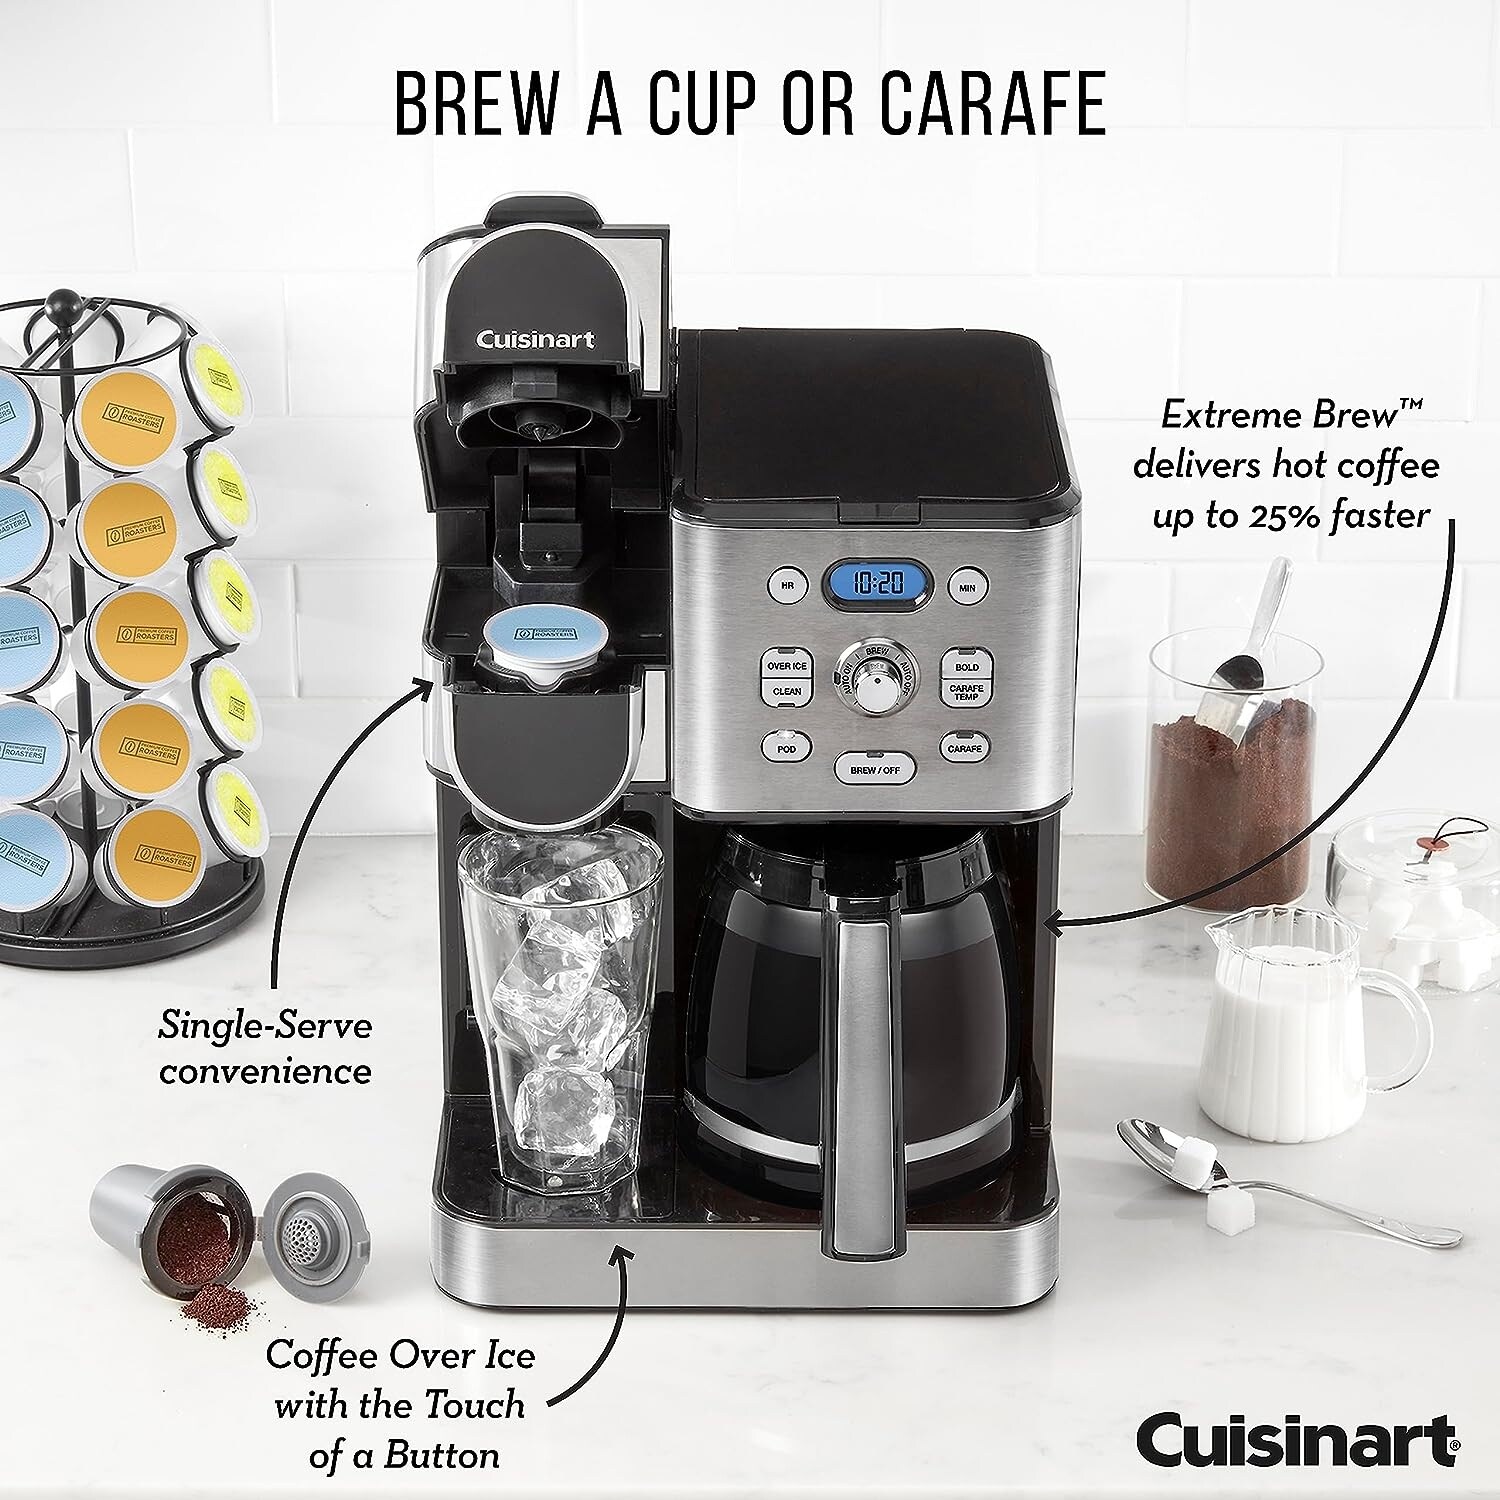 https://ak1.ostkcdn.com/images/products/is/images/direct/a4385572bbacd125695c9279154372af13c5669b/Cuisinart-SS-16-Coffee-Maker%2C-12-Cup-Glass-Carafe%2C-Automatic-Hot-%26-Iced-Coffee-Maker%2C-Single-Server-Brewer%2C-Stainless-Steel.jpg